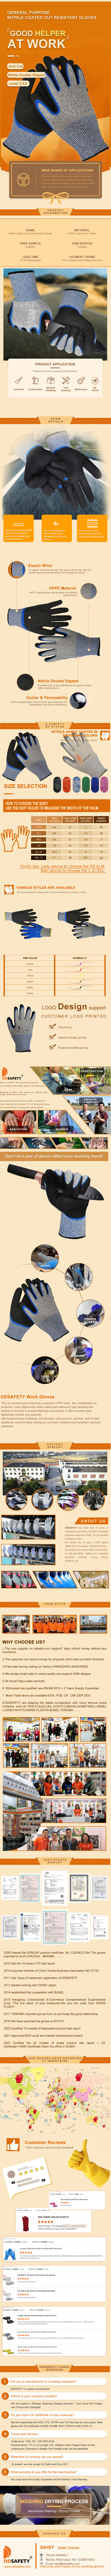 Cut Resistant Double Dipped Sandy Nitrile Coated Work Gloves Hppe Safety Gloves - DCR612 Cut Resistant Double Dipped Sandy Nitrile Coated Work Gloves Hppe Safety Gloves - DCR612 gloves,cut resistant gloves,nitrile coated gloves,safety goves,Double Dipped gloves